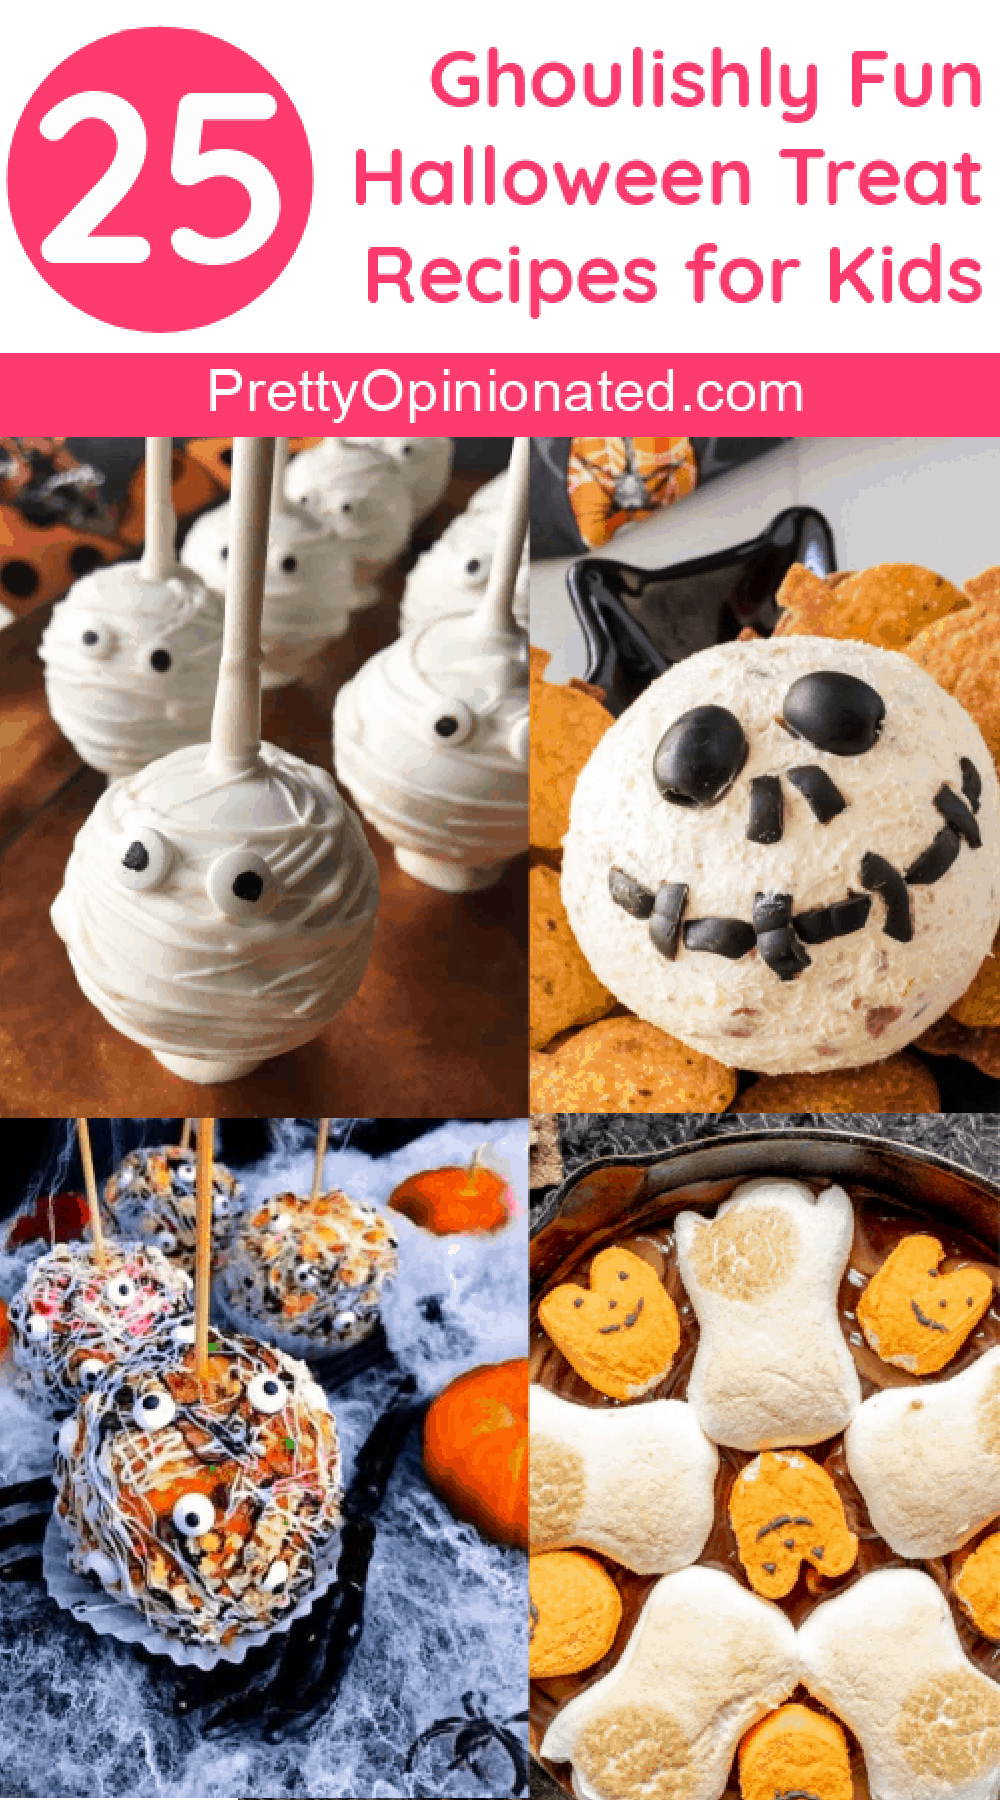 If kids can't go out begging for candy this year, bring the treats to them! Check out these tasty and ghoulishly fun Halloween treat recipes that you can make for them (or better yet, together)!